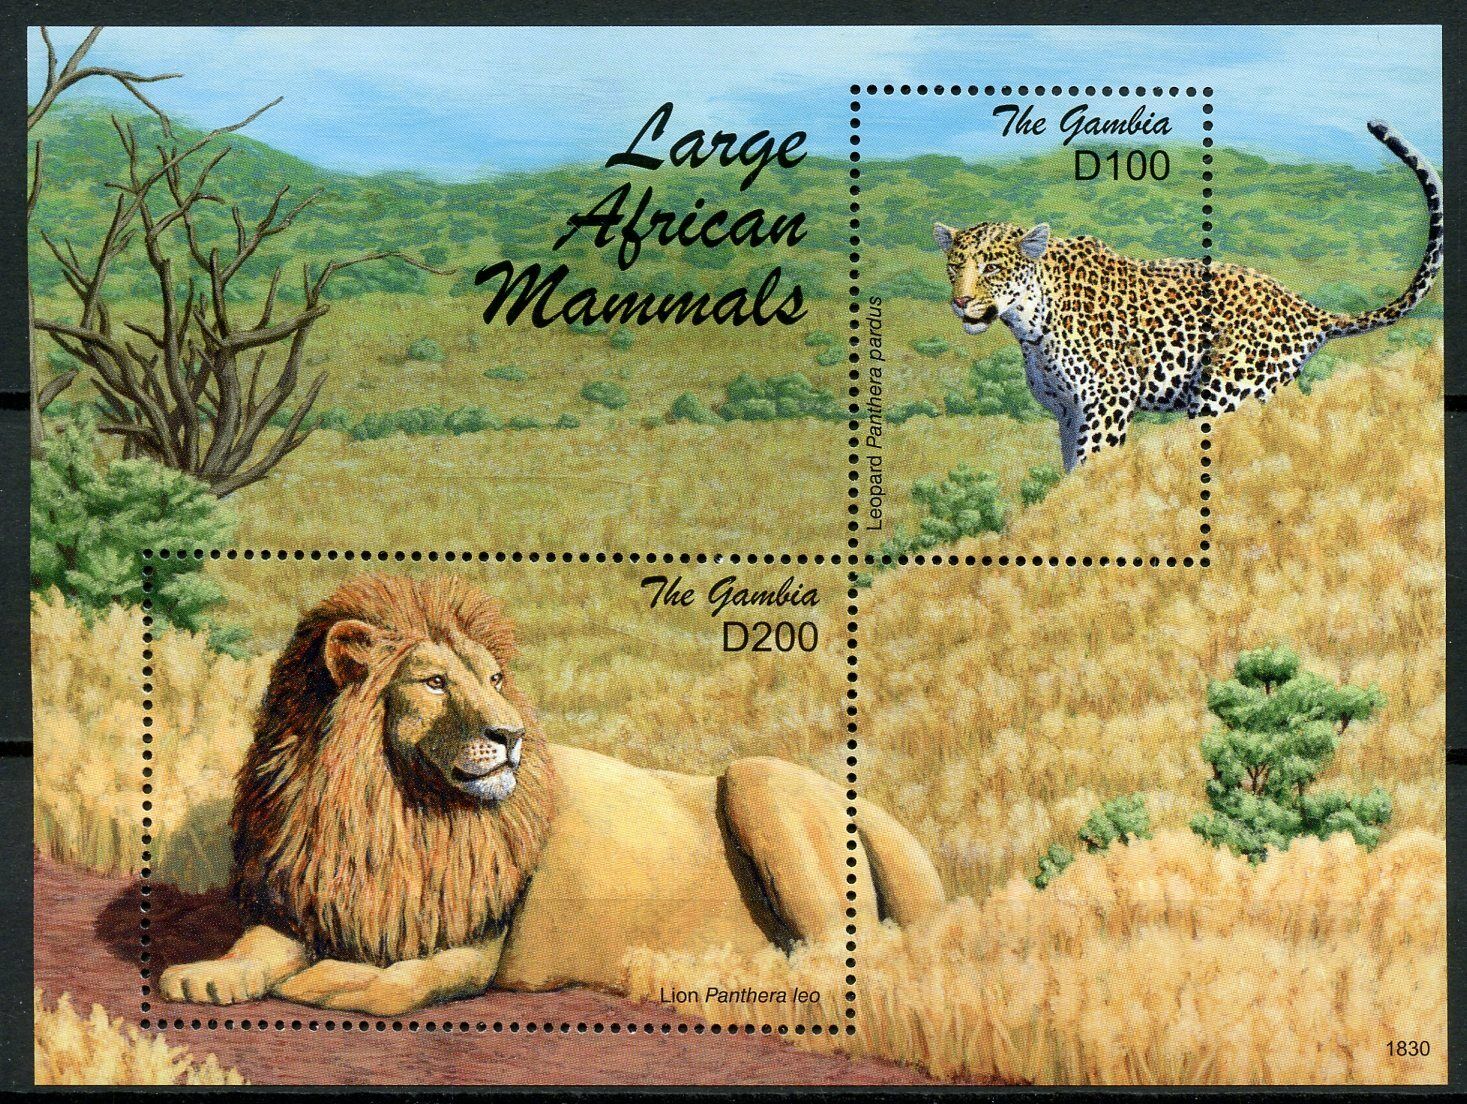 Gambia 2018 MNH Wild Animals Stamps Large African Mammals Lions Leopards 2v S/S